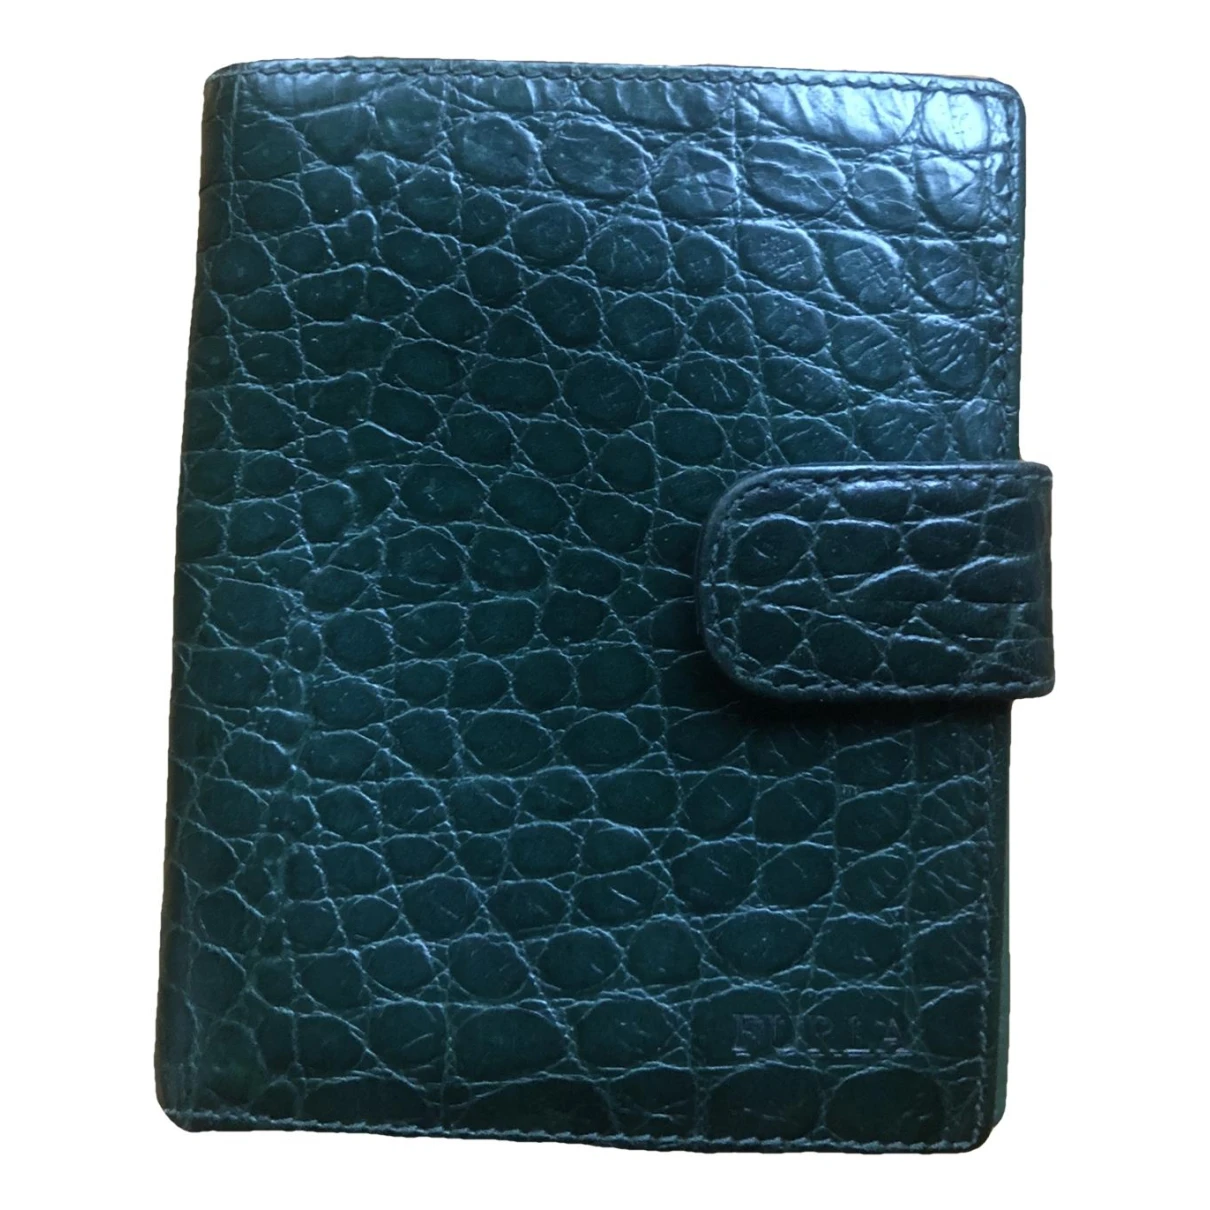 Pre-owned Furla Leather Wallet In Green